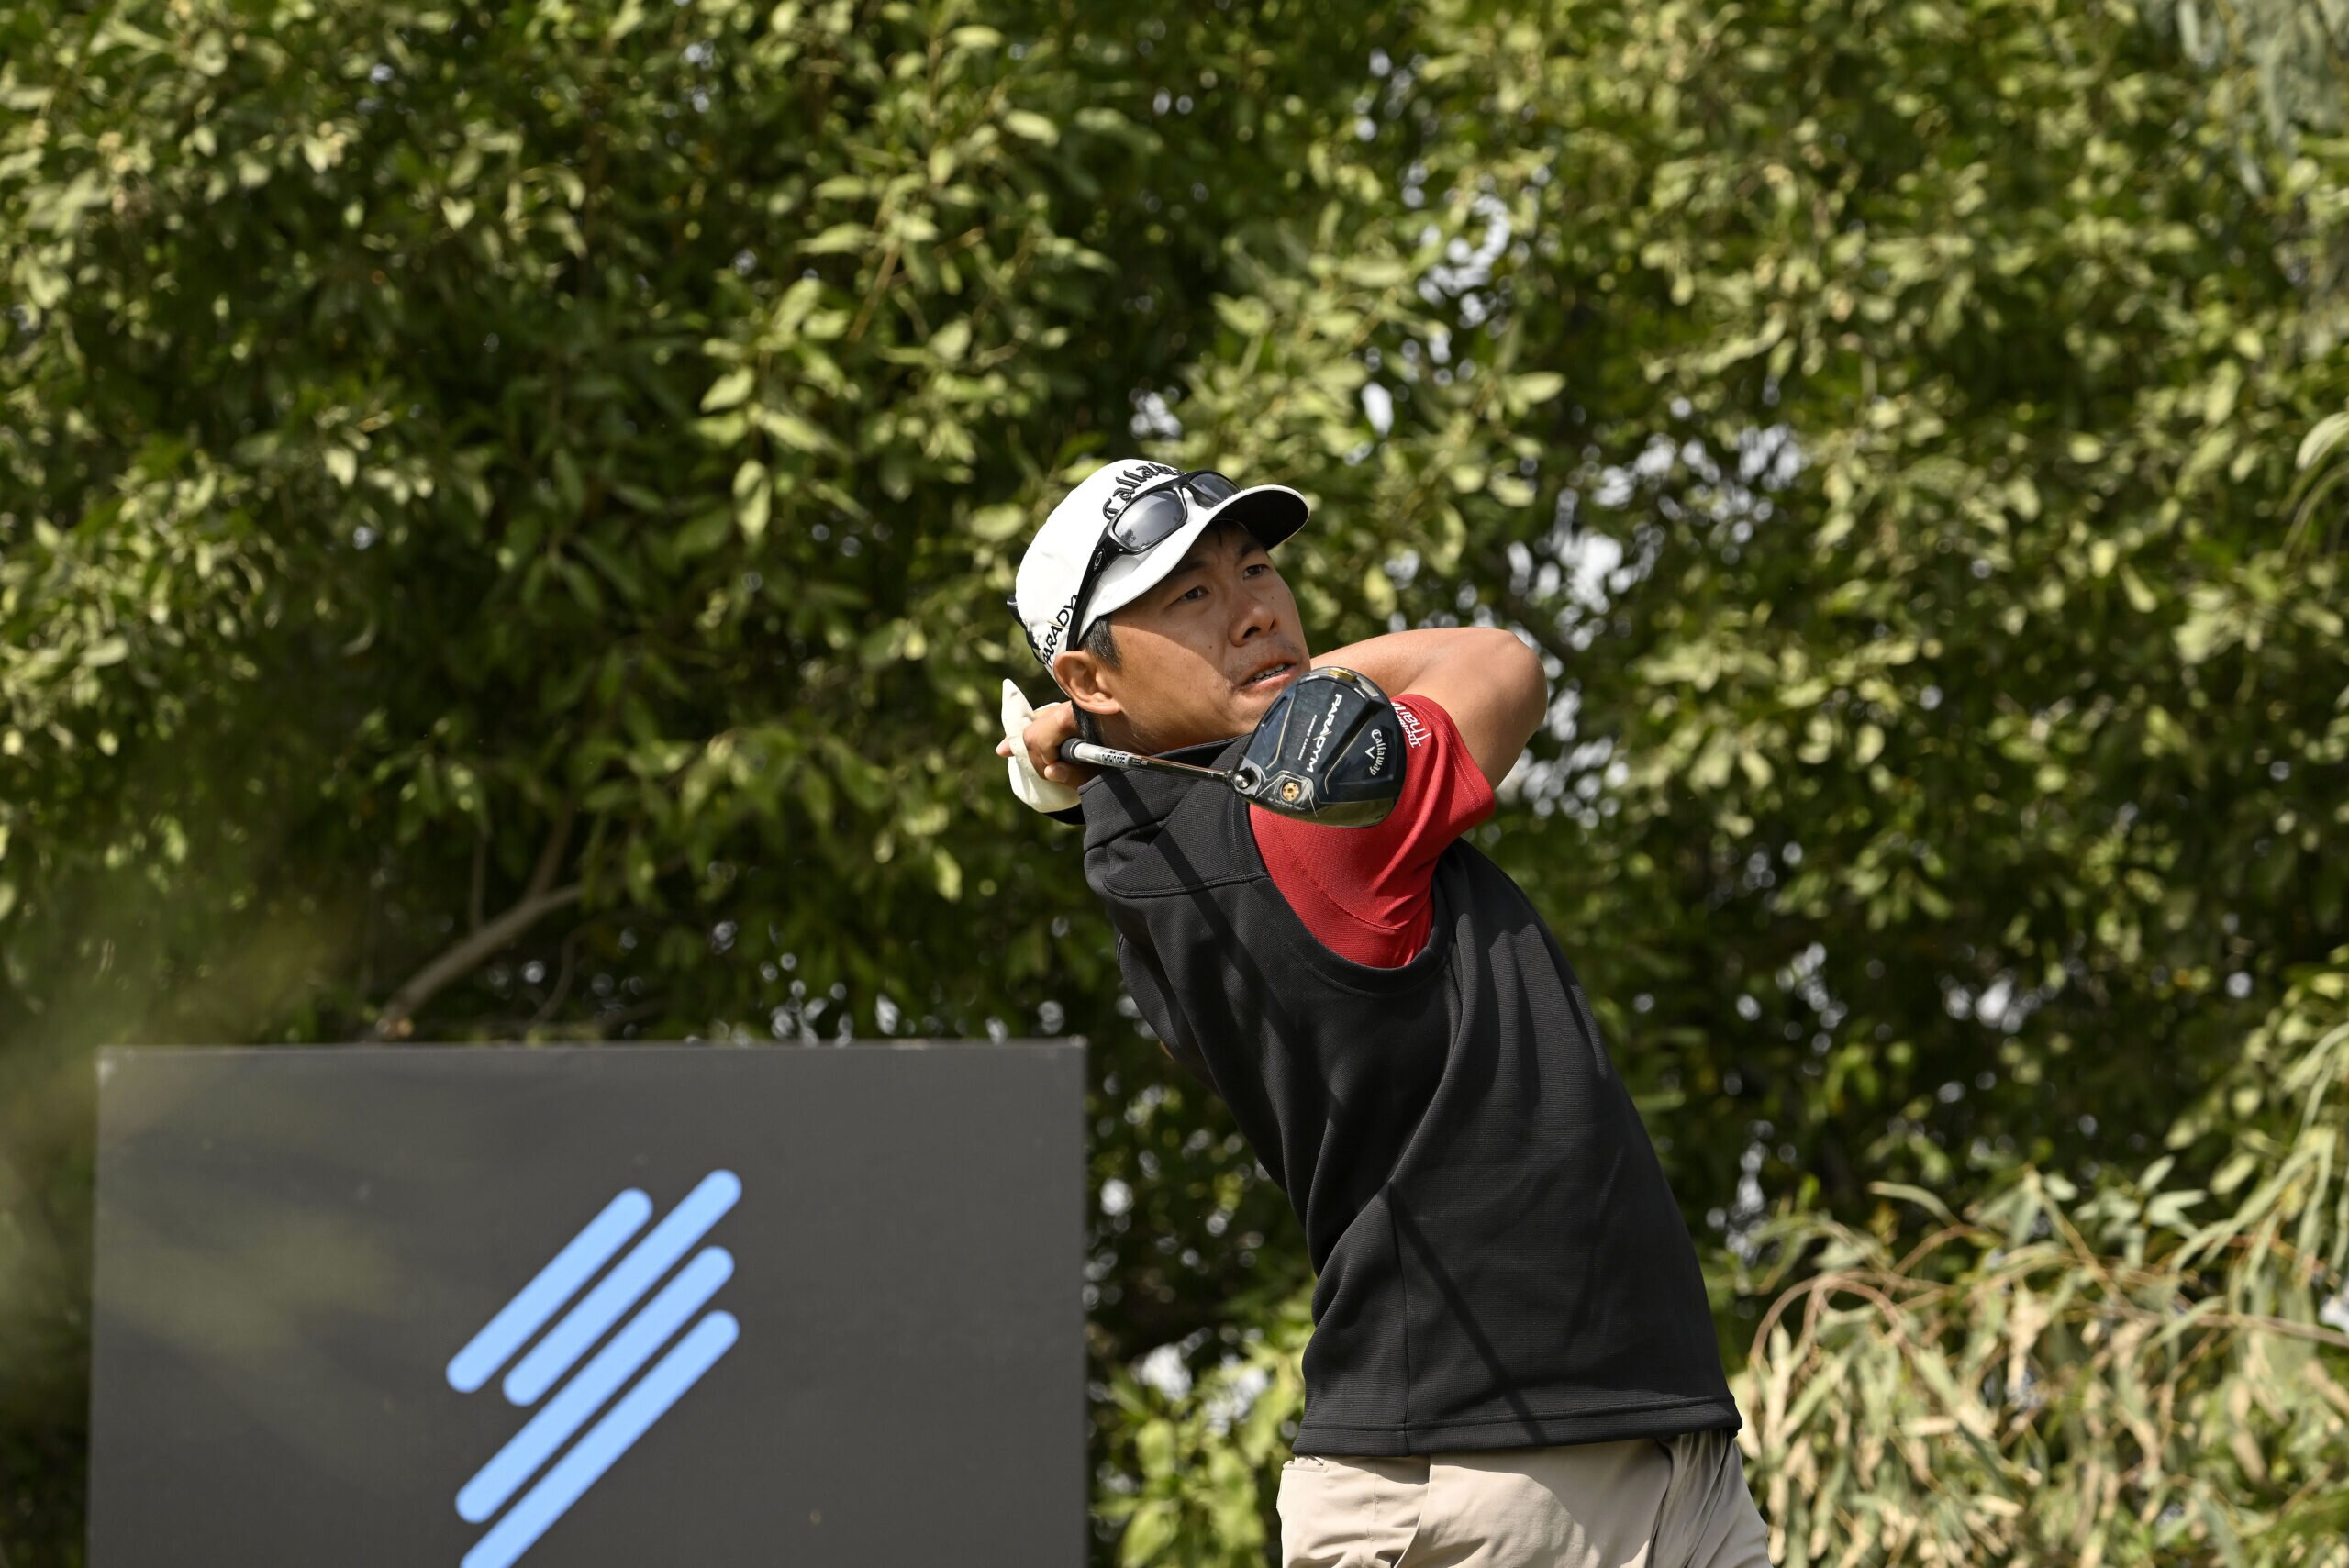 Gunn Charoenkul of Thailand pictured during Round Four on Sunday February 19, 2023 at the US$2.5 million International Series Qatar at Doha Golf Club, Doha, Qatar. The tournament is being held from February 16-19, 2023. Picture by Paul Lakatos/Asian Tour.